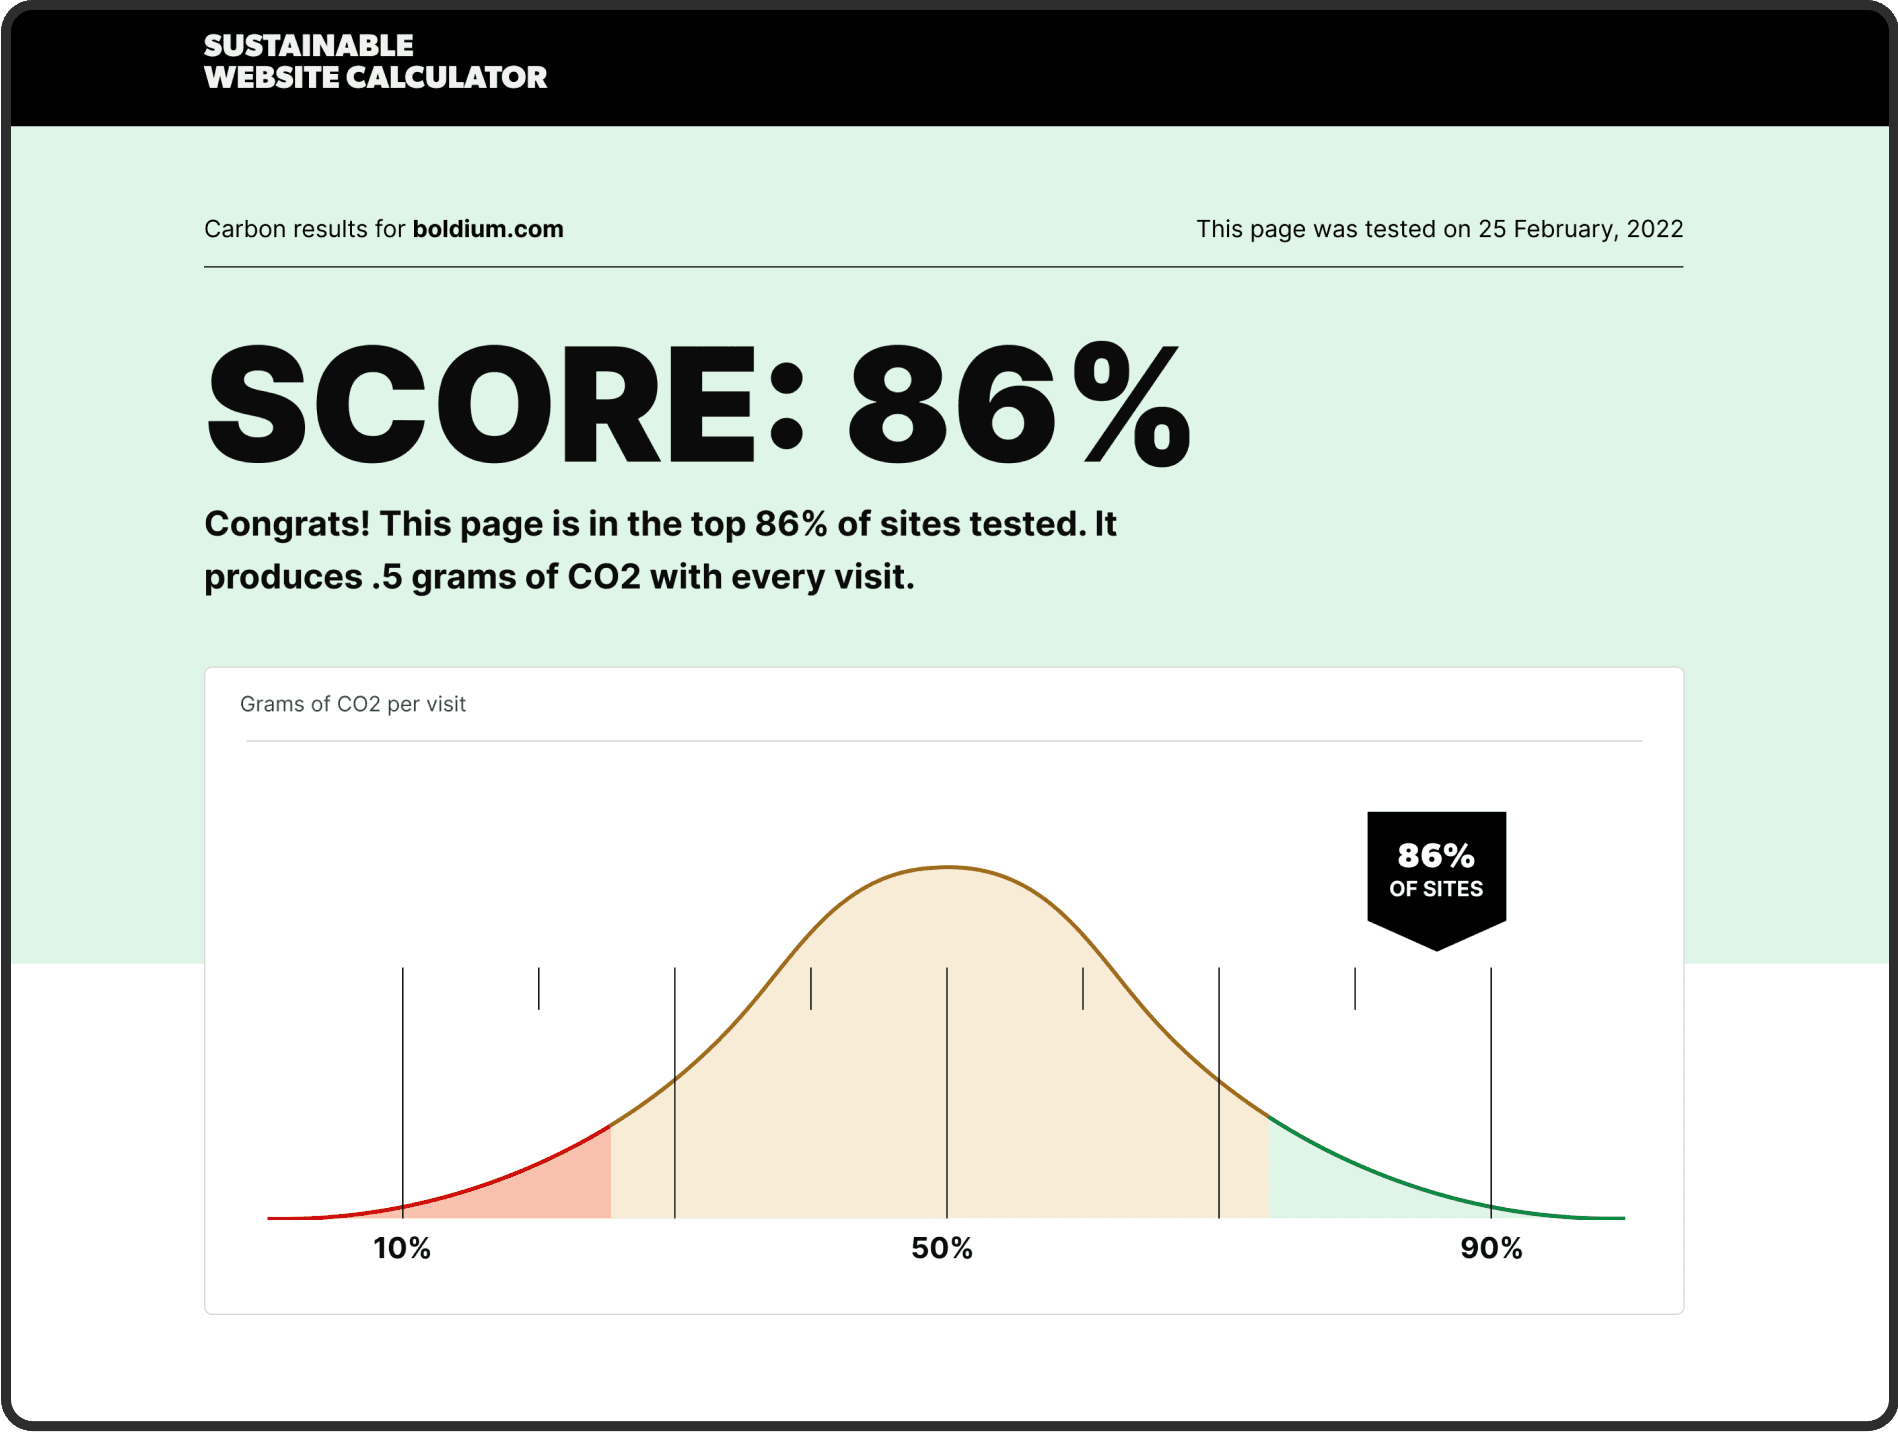 A design mockup of our carbon calculator tool for web pages, showing a percentage based ranking and bell curve.